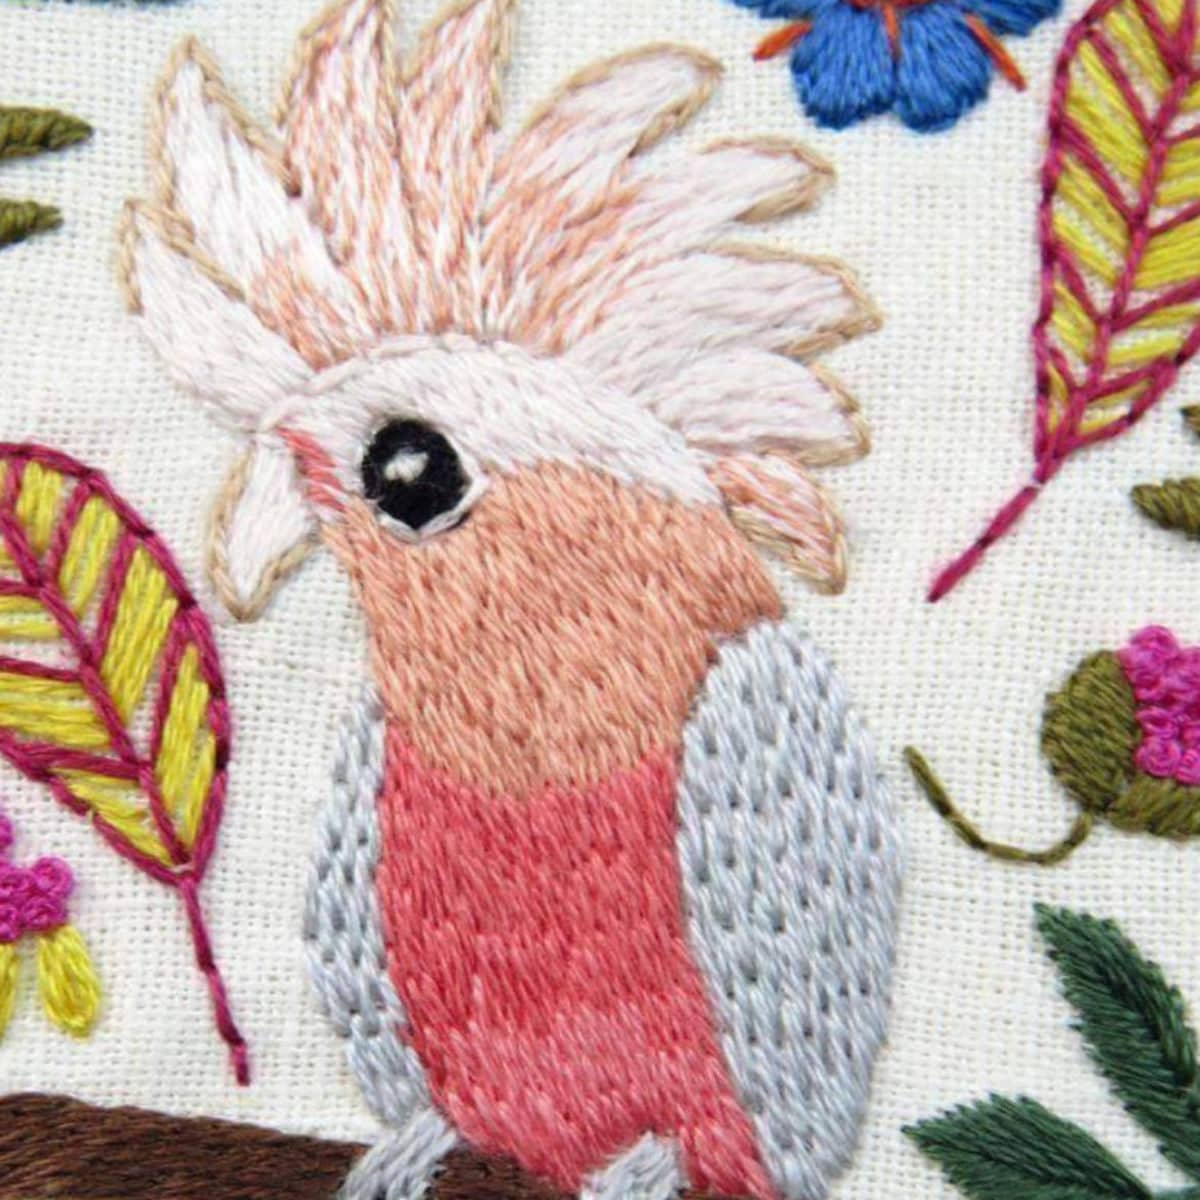 Galah Cockatoo Tropical Parrot , PDF Download , StitchDoodles , bird embroidery, embroidery hoop kit, embroidery kits for adults, embroidery kits for beginners, flower embroidery, hand embroidery, modern embroidery kits, PDF pattern, unique embroidery kits , StitchDoodles , shop.stitchdoodles.com